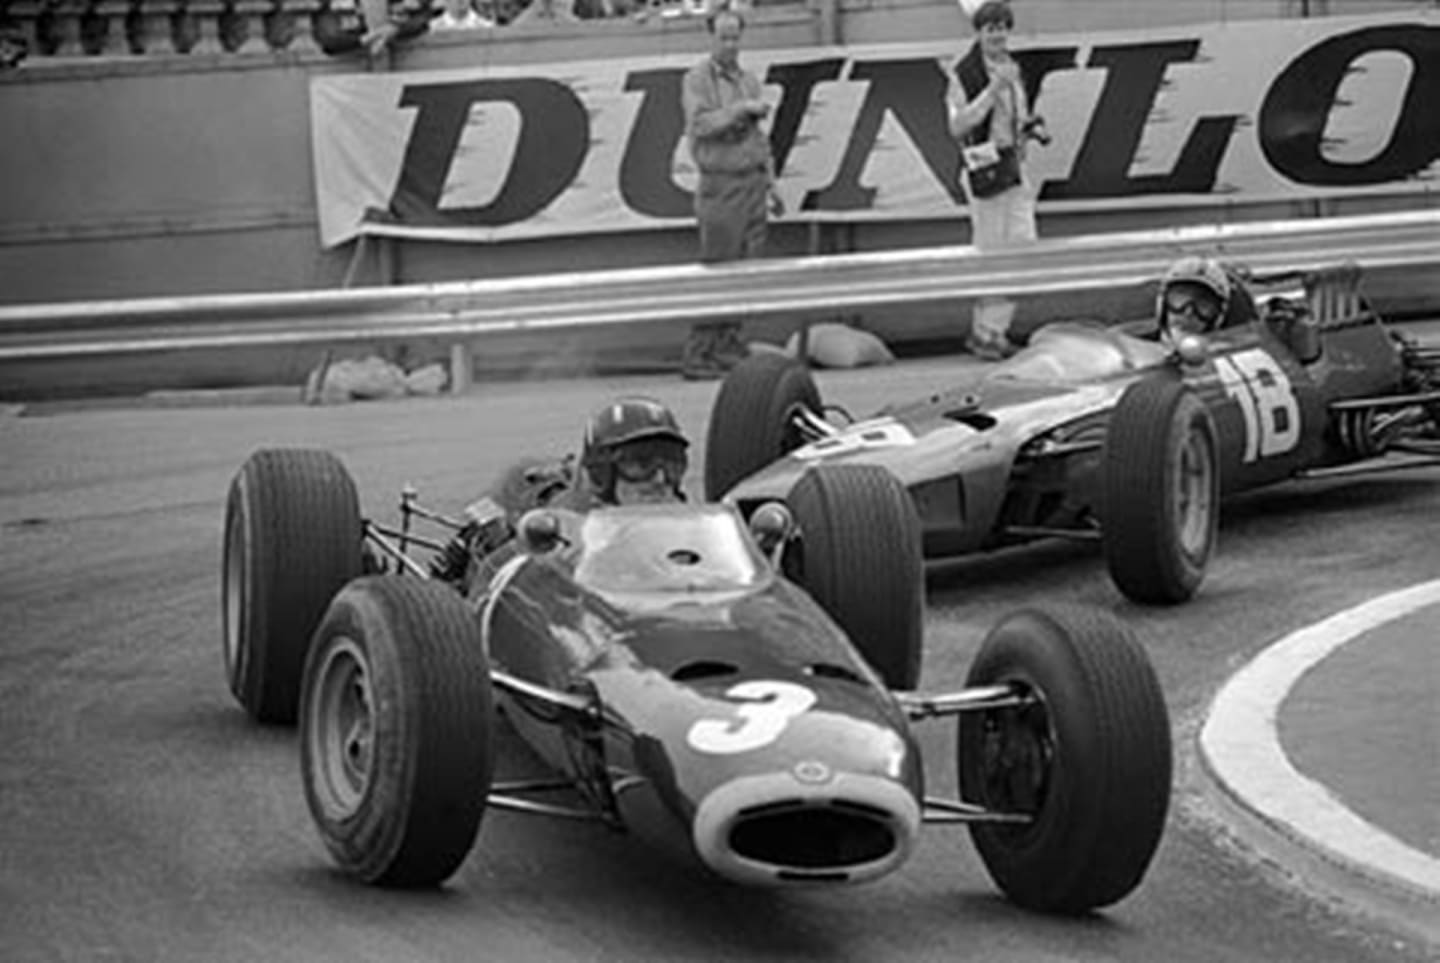 Monte Carlo, May 1965: BRM’s Graham Hill leads the Ferrari of John Surtees on his way to a dominant